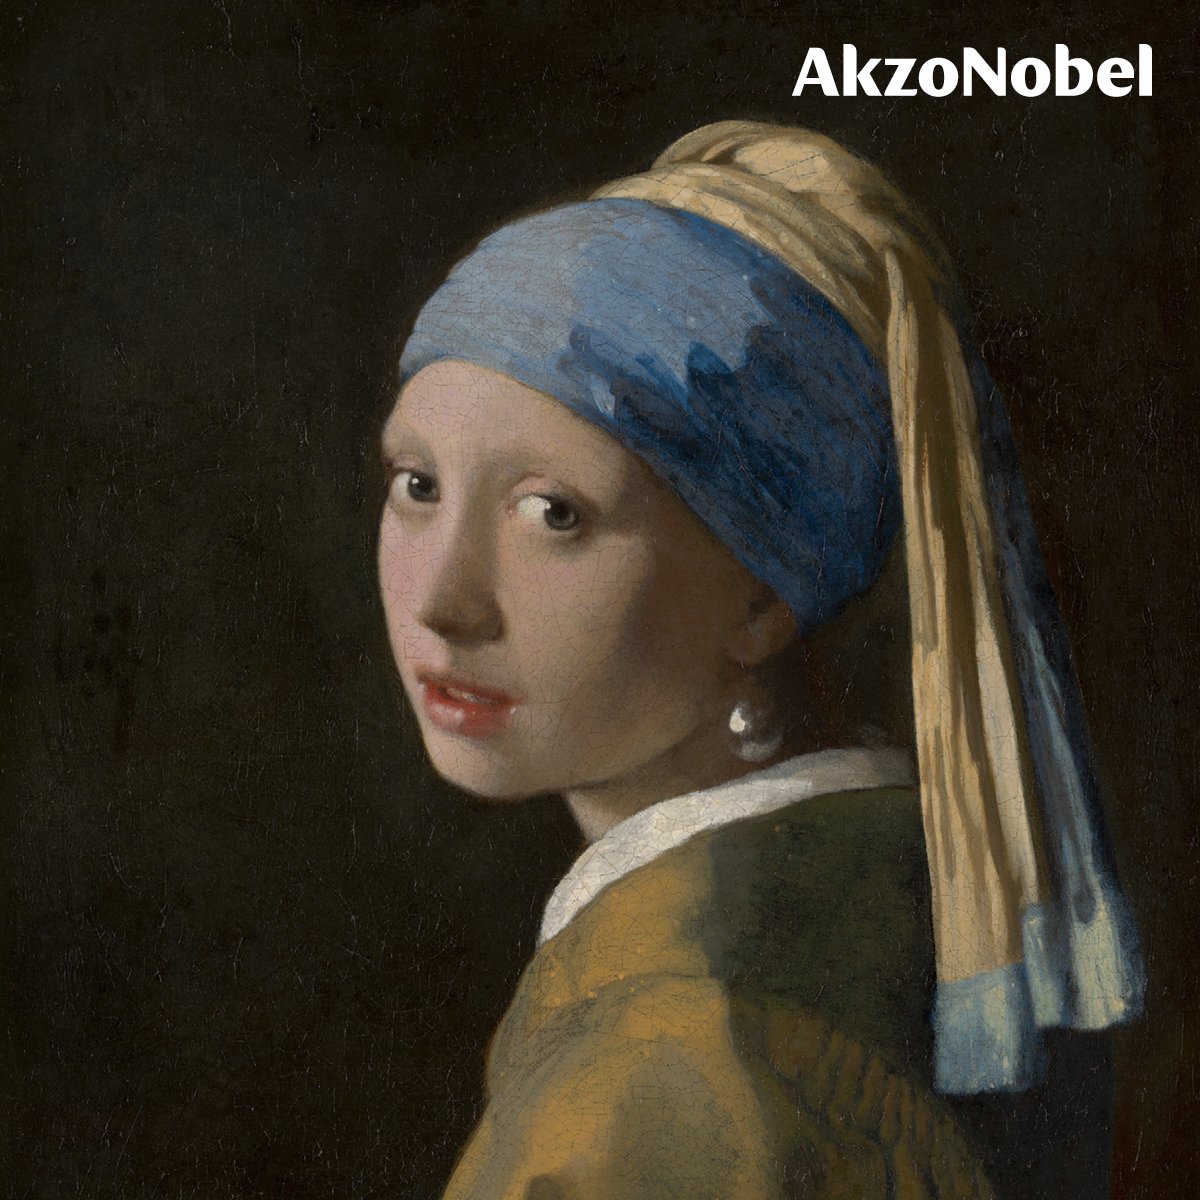 Who’s that girl? Stay tuned as we pull the curtain back on The Girl with a Pearl Earring with groundbreaking research in collaboration with @mauritshuis museum and @tudelft university. #MyGirlWithAPearl #Vermeer #AkzoNobel #Art #Culture #Museum #History